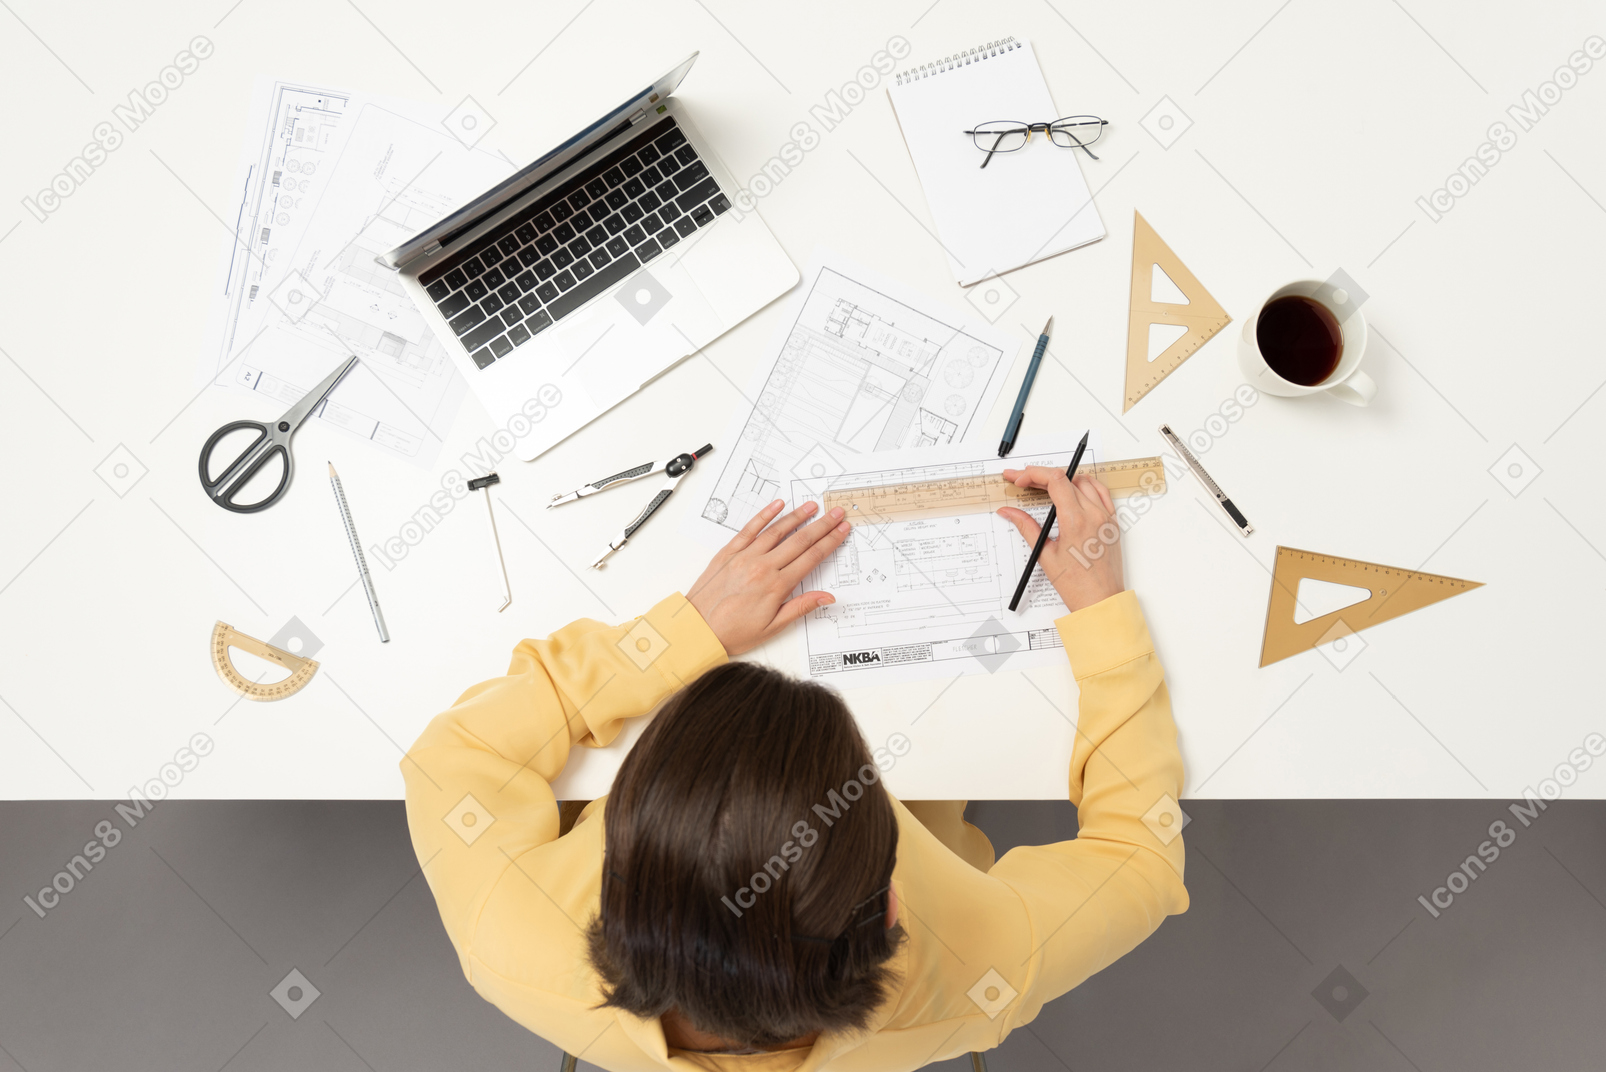 A female architect working on architectural drawings